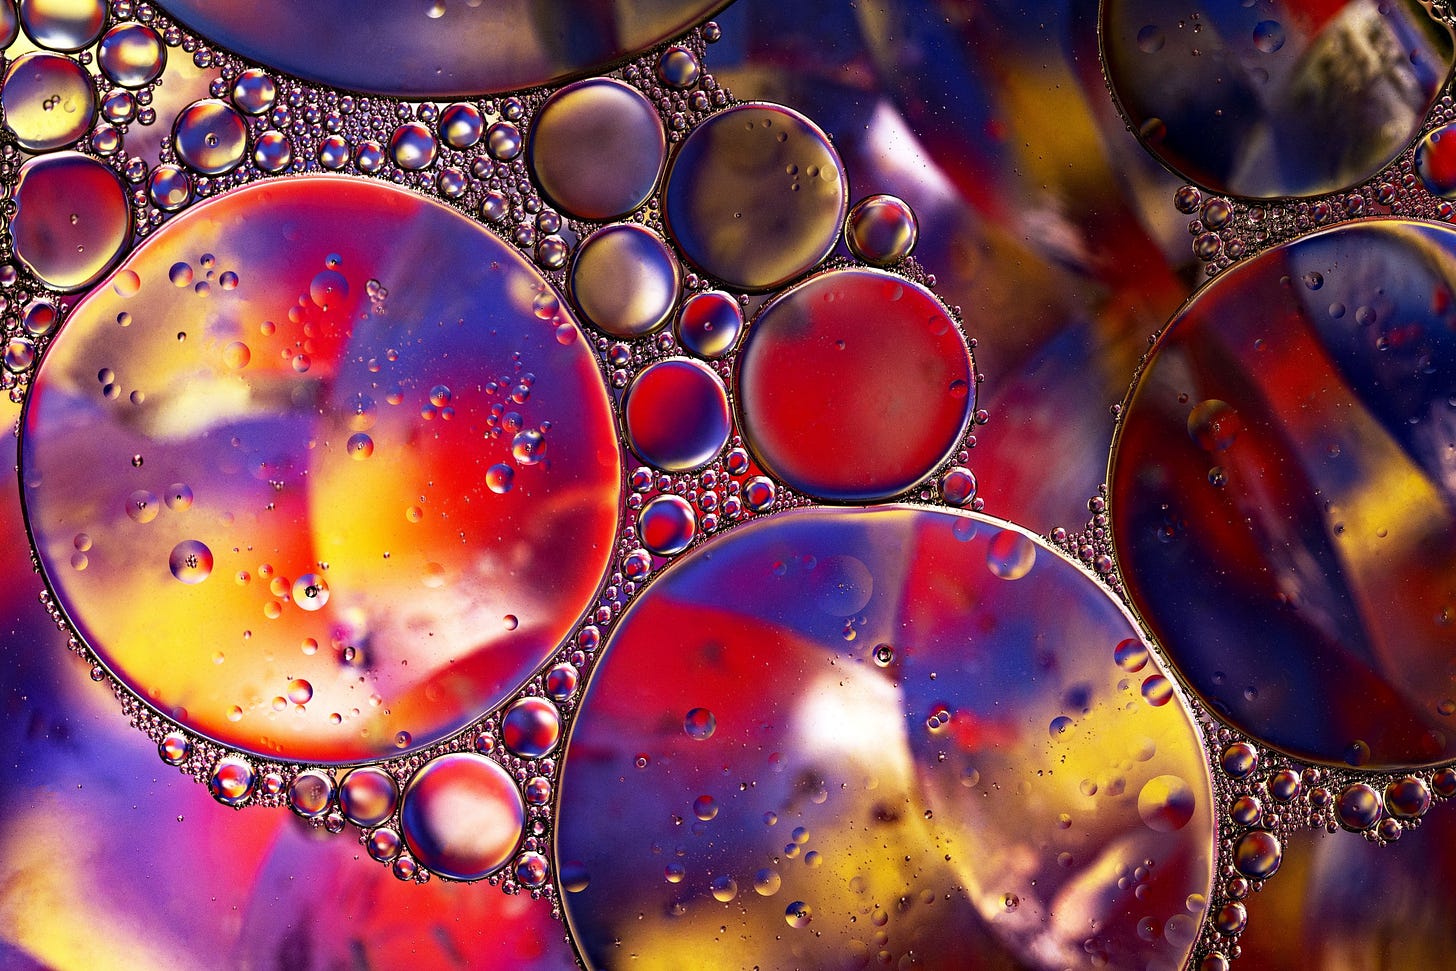 Image of fractal arrangement of bubbles for article by Larry G. Maguire